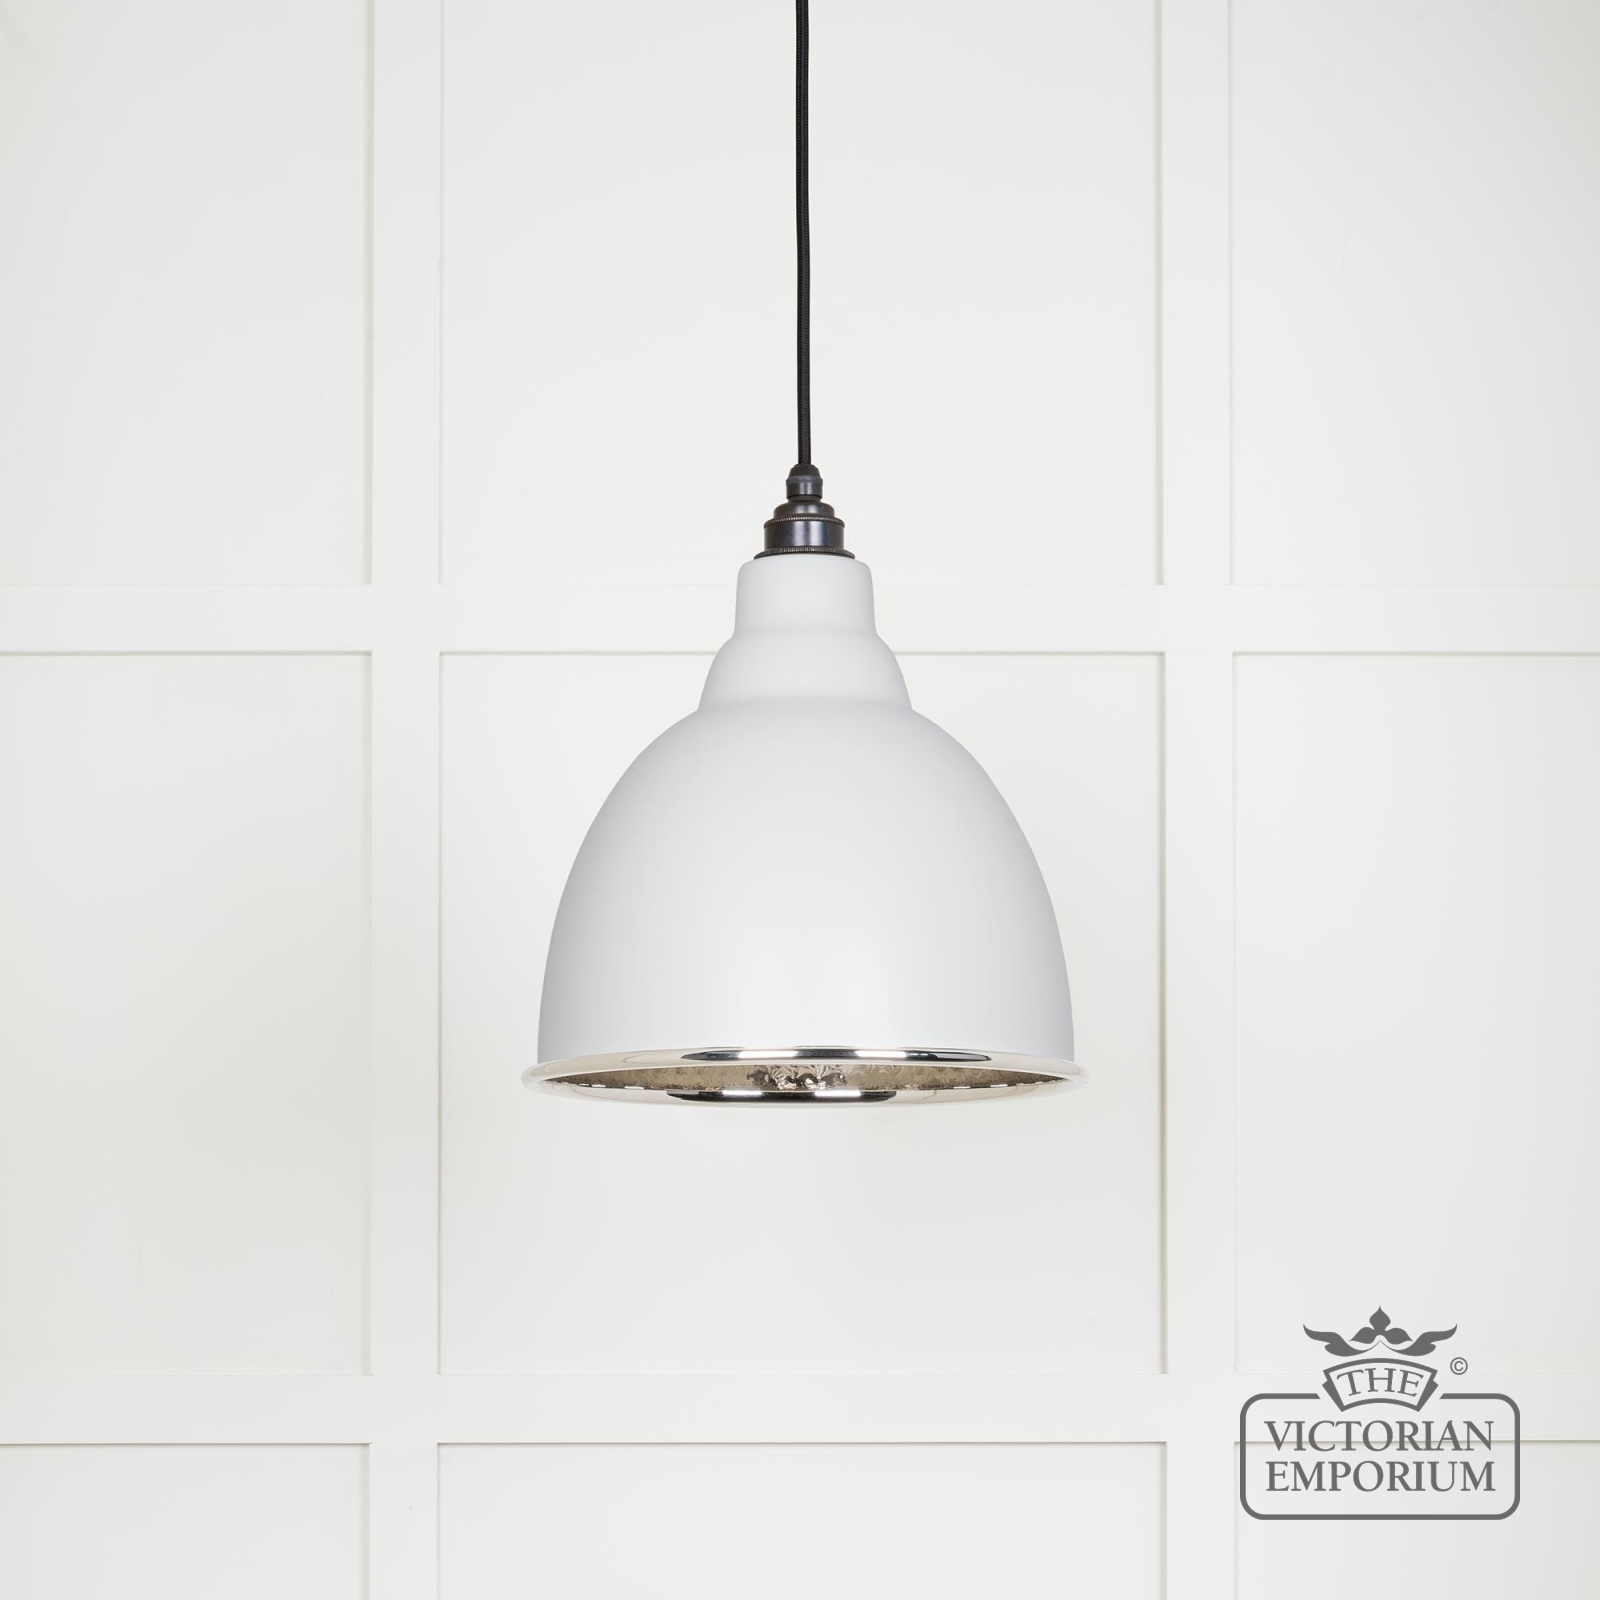 Brindle Pendant Light in Flock with Hammered Nickel Interior